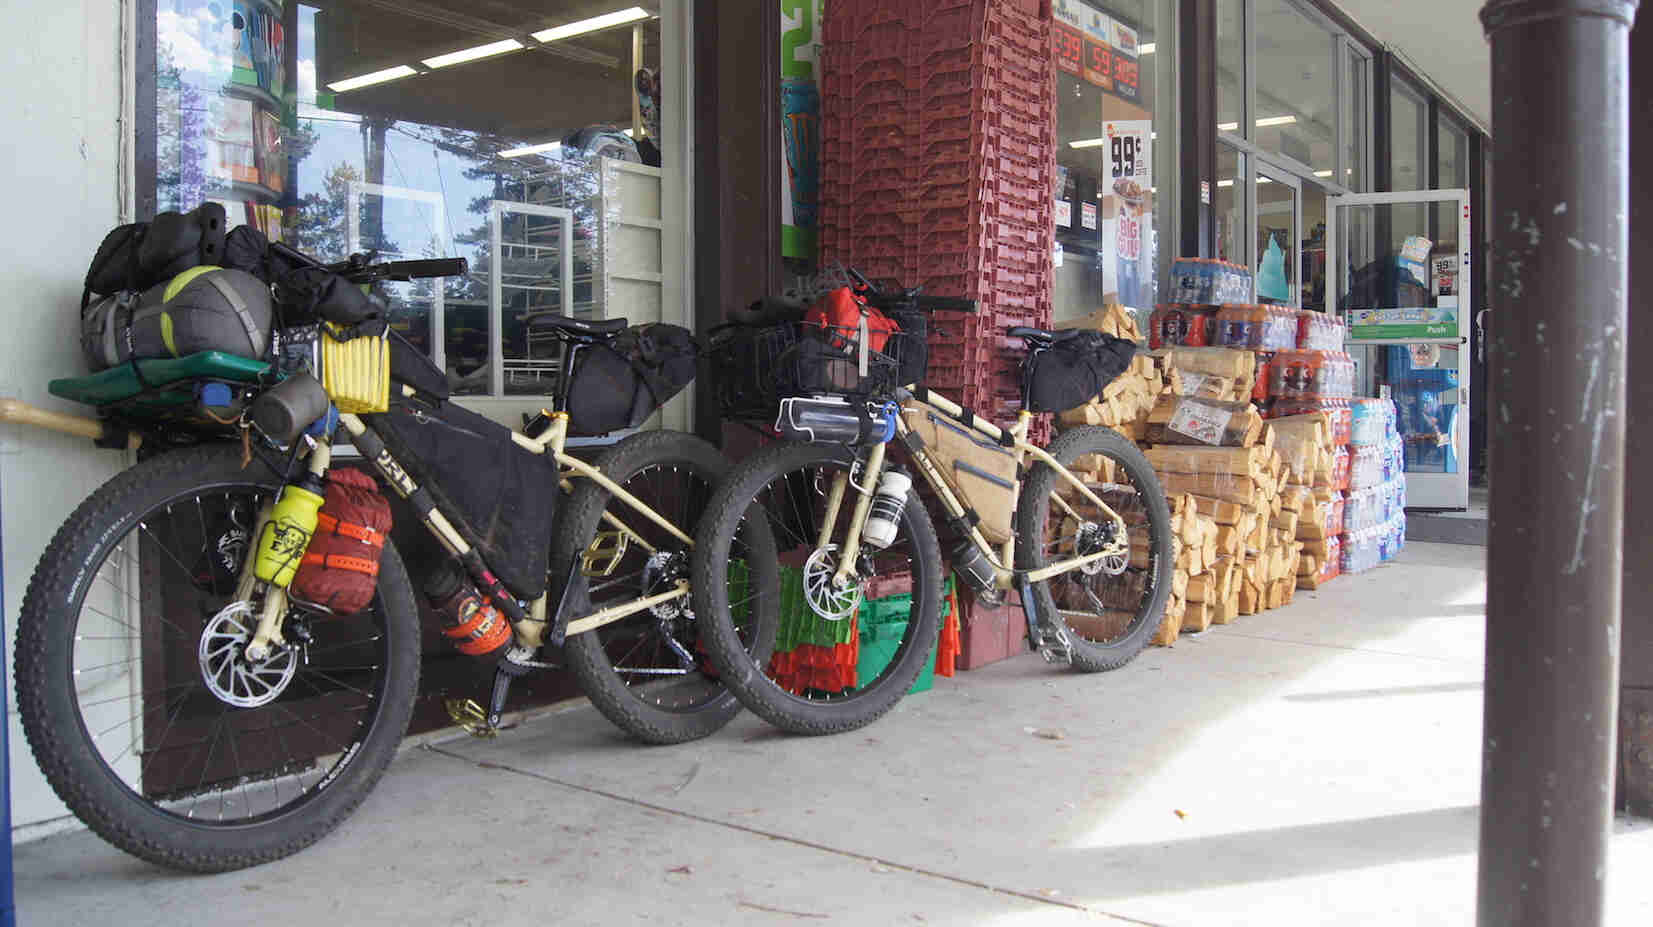 Surly fat bikes parked against a wall in front of a grocery store